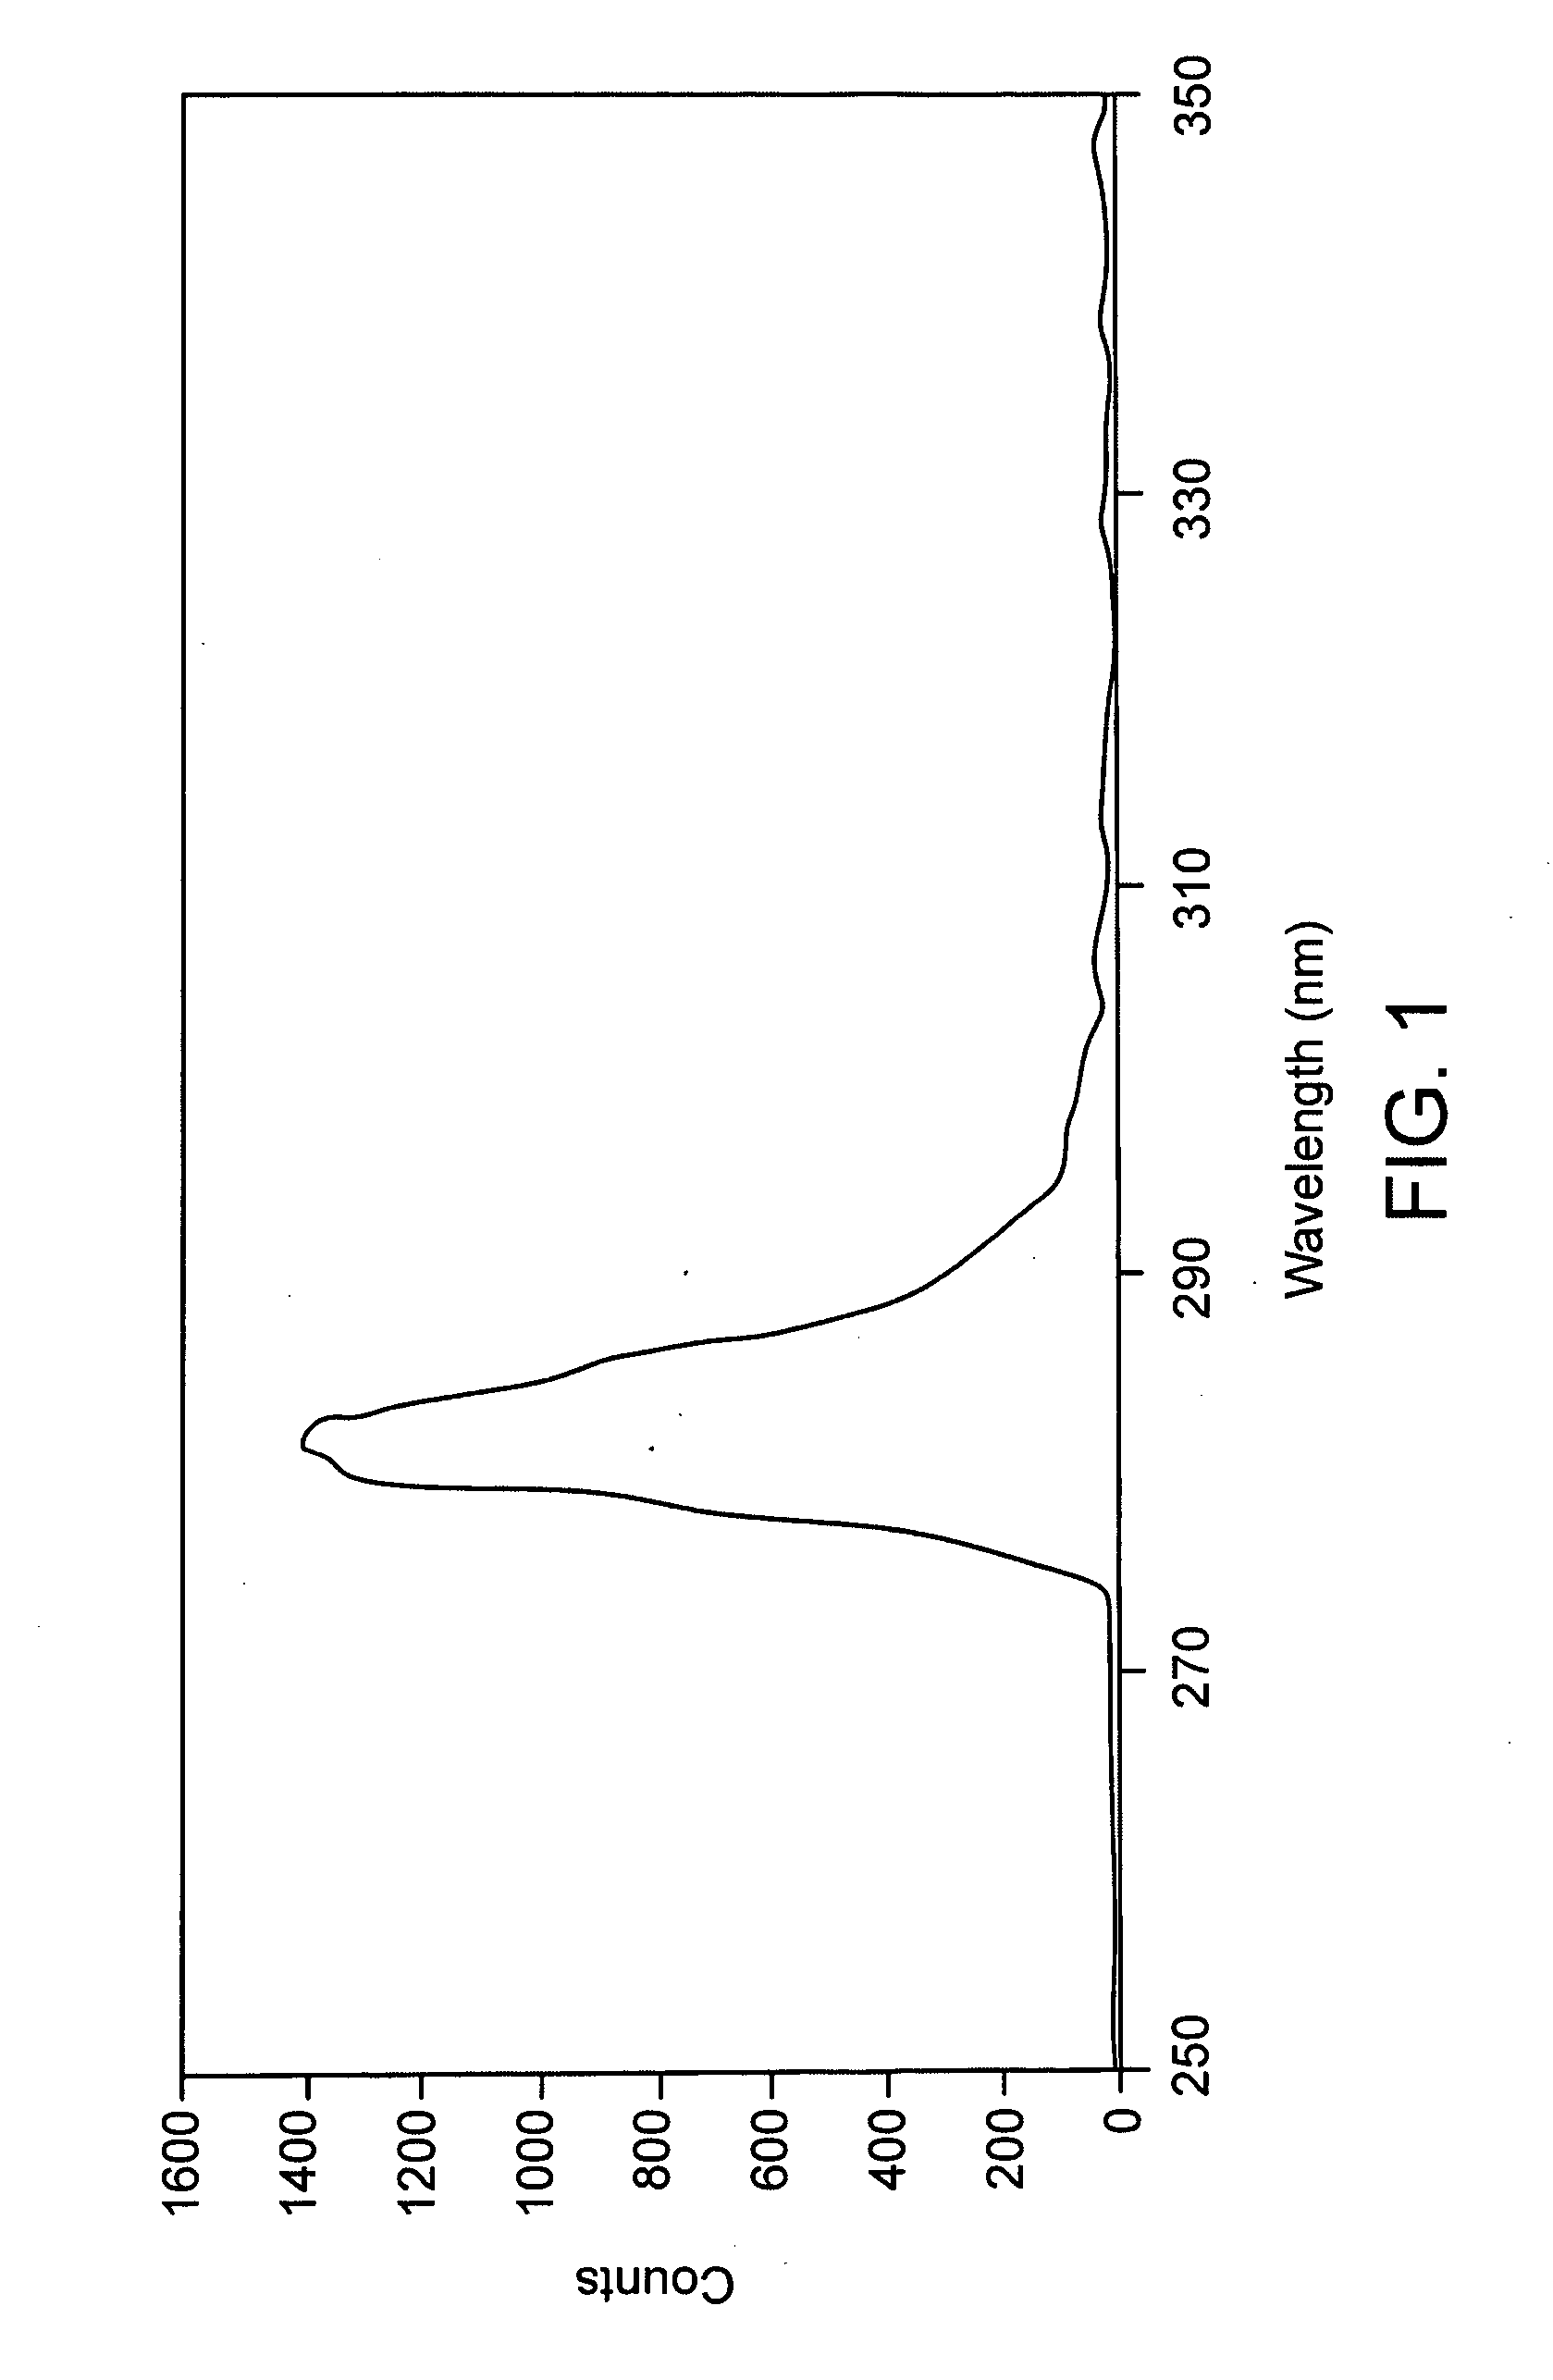 Method for both time and frequency domain protein measurements